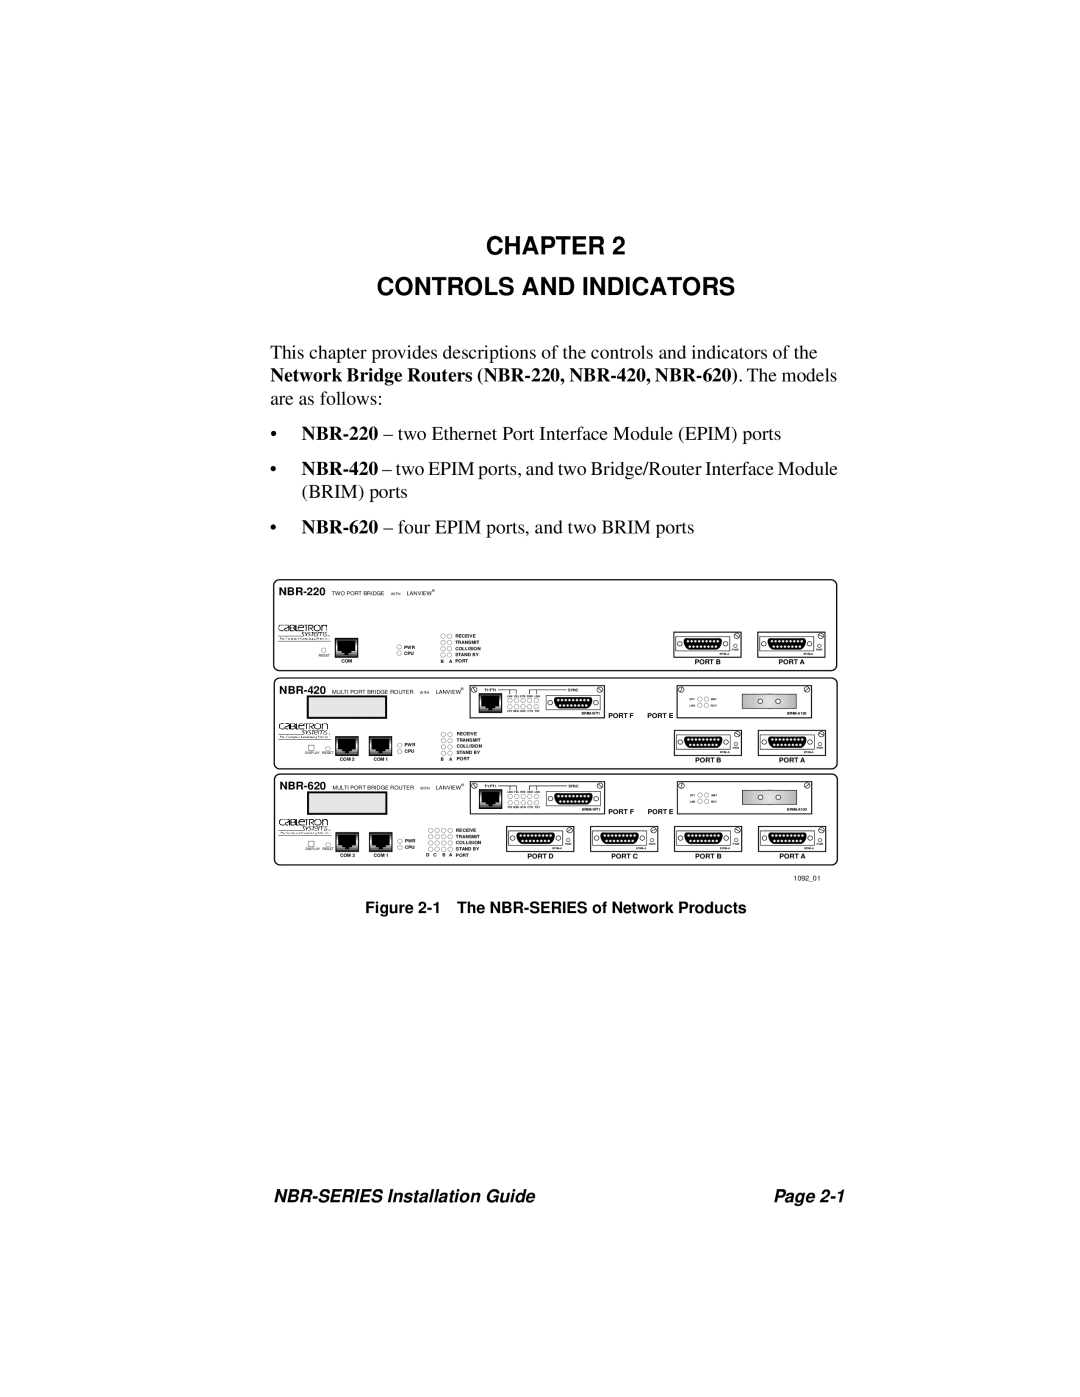 Cabletron Systems NBR-220, NBR-420, NBR-620 manual Chapter Controls And Indicators, 1 The NBR-SERIES of Network Products 